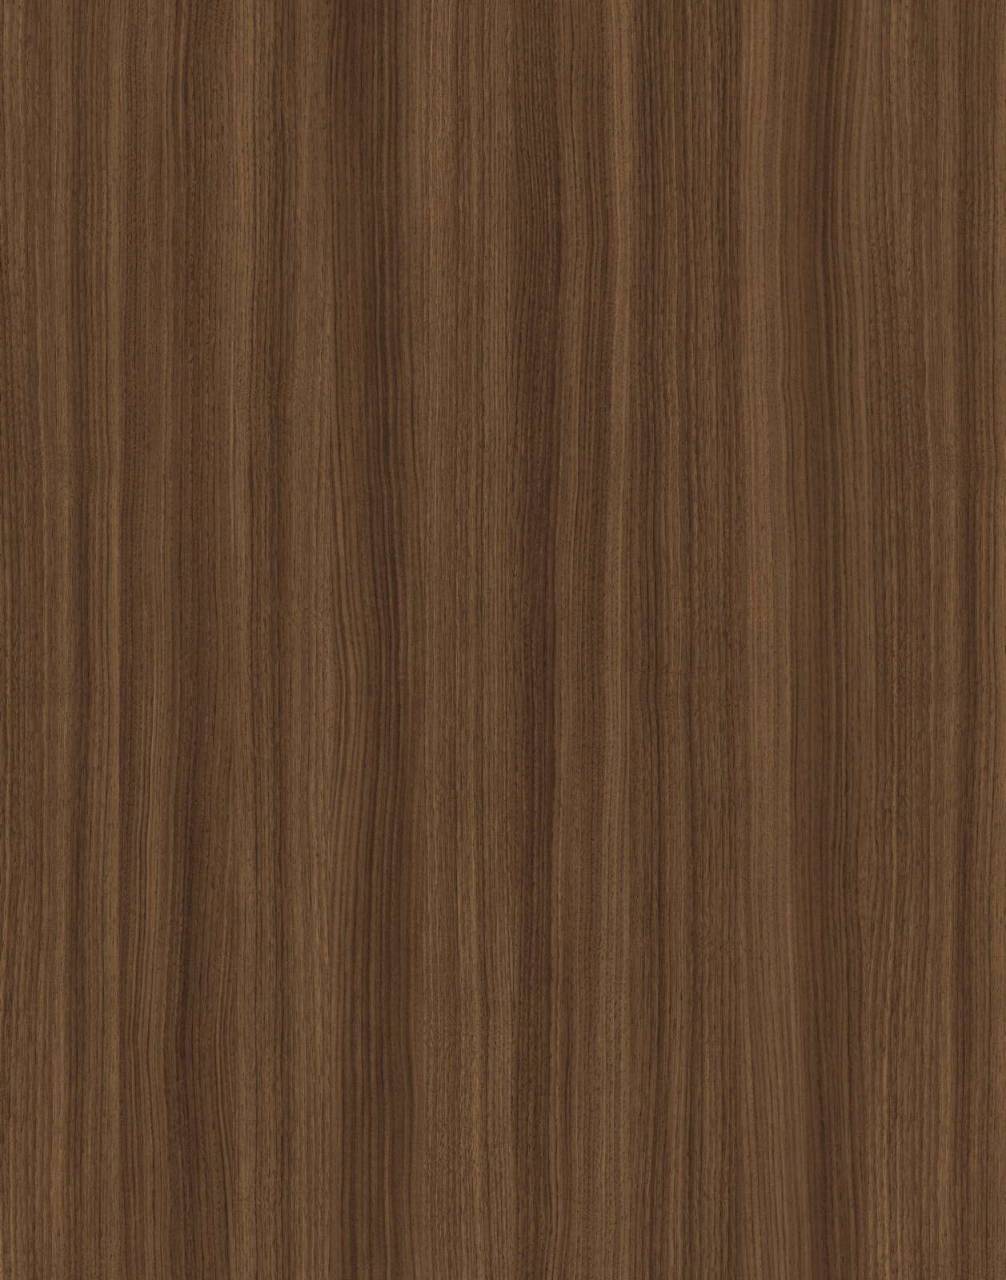 Close-up of the 18mm Kronodesign K547 Tobacco Franklin Walnut MF board, highlighting its rich, dark grain pattern and quality finish.